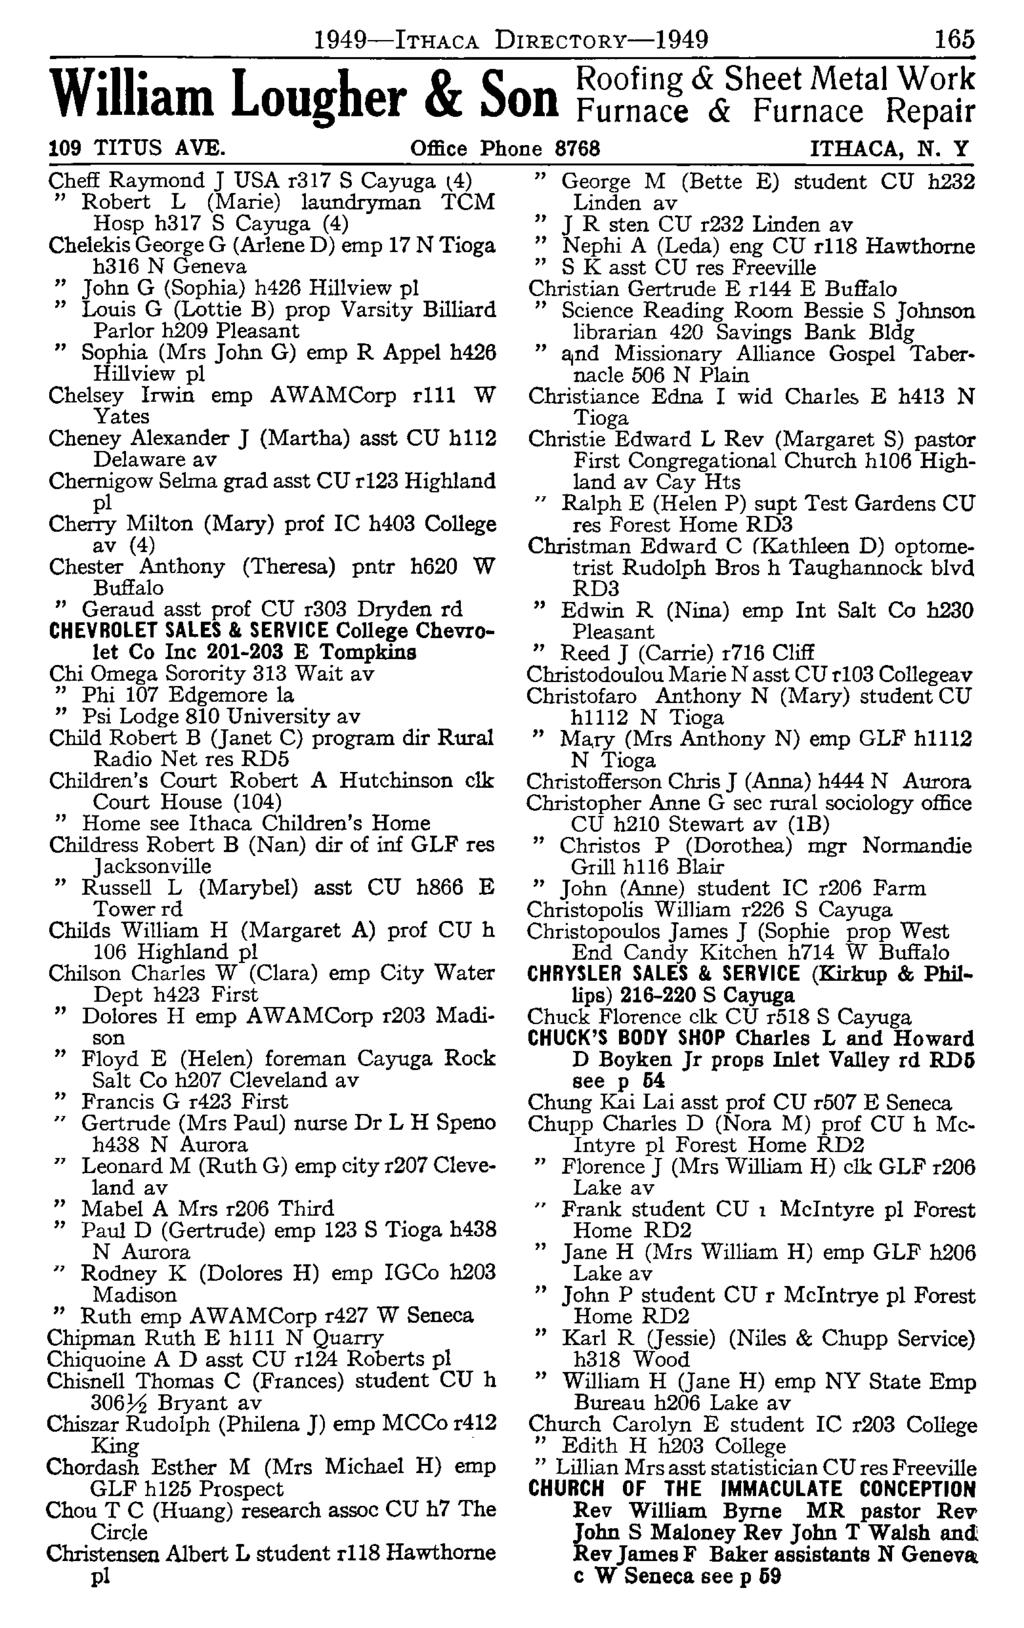 Welle L h & S Roofing & Sheet Metal Wark 1949-lTHAcA DIRECTORY-1949 165 I lam oug er on Furnace & Furnace Repair 109 TITUS AVE. Office Phone 8768 ITHACA, N.